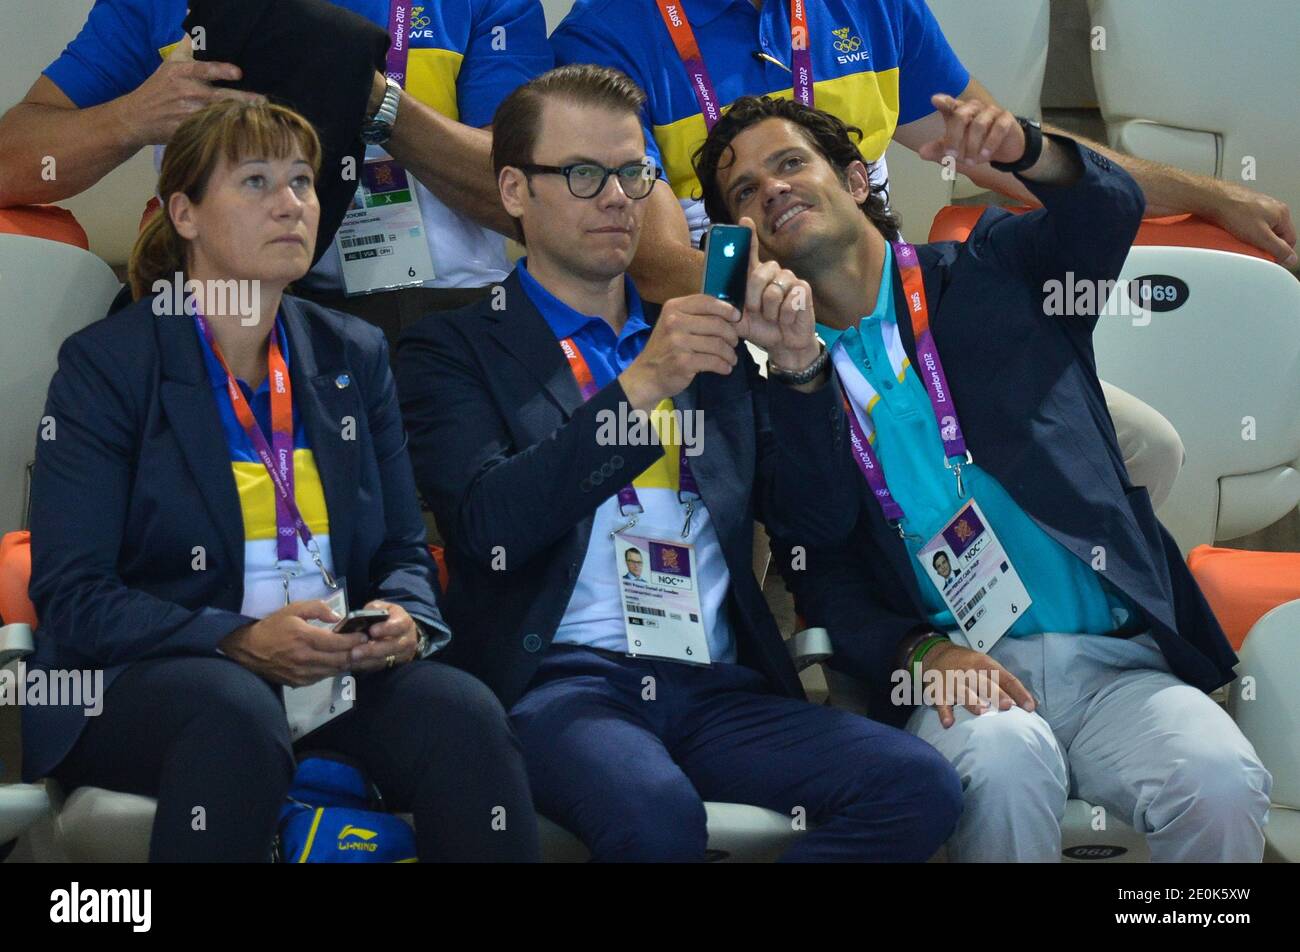 Prince Daniel the Duke of Vastergotland with Prince Carl Philip of Sweden attend the Swimming Final session at the aquatic center during the 2012 London Olympics in London, UK on August 1, 2012. Photo by Gouhier-Guibbaud-JMP/ABACAPRESS.COM Stock Photo